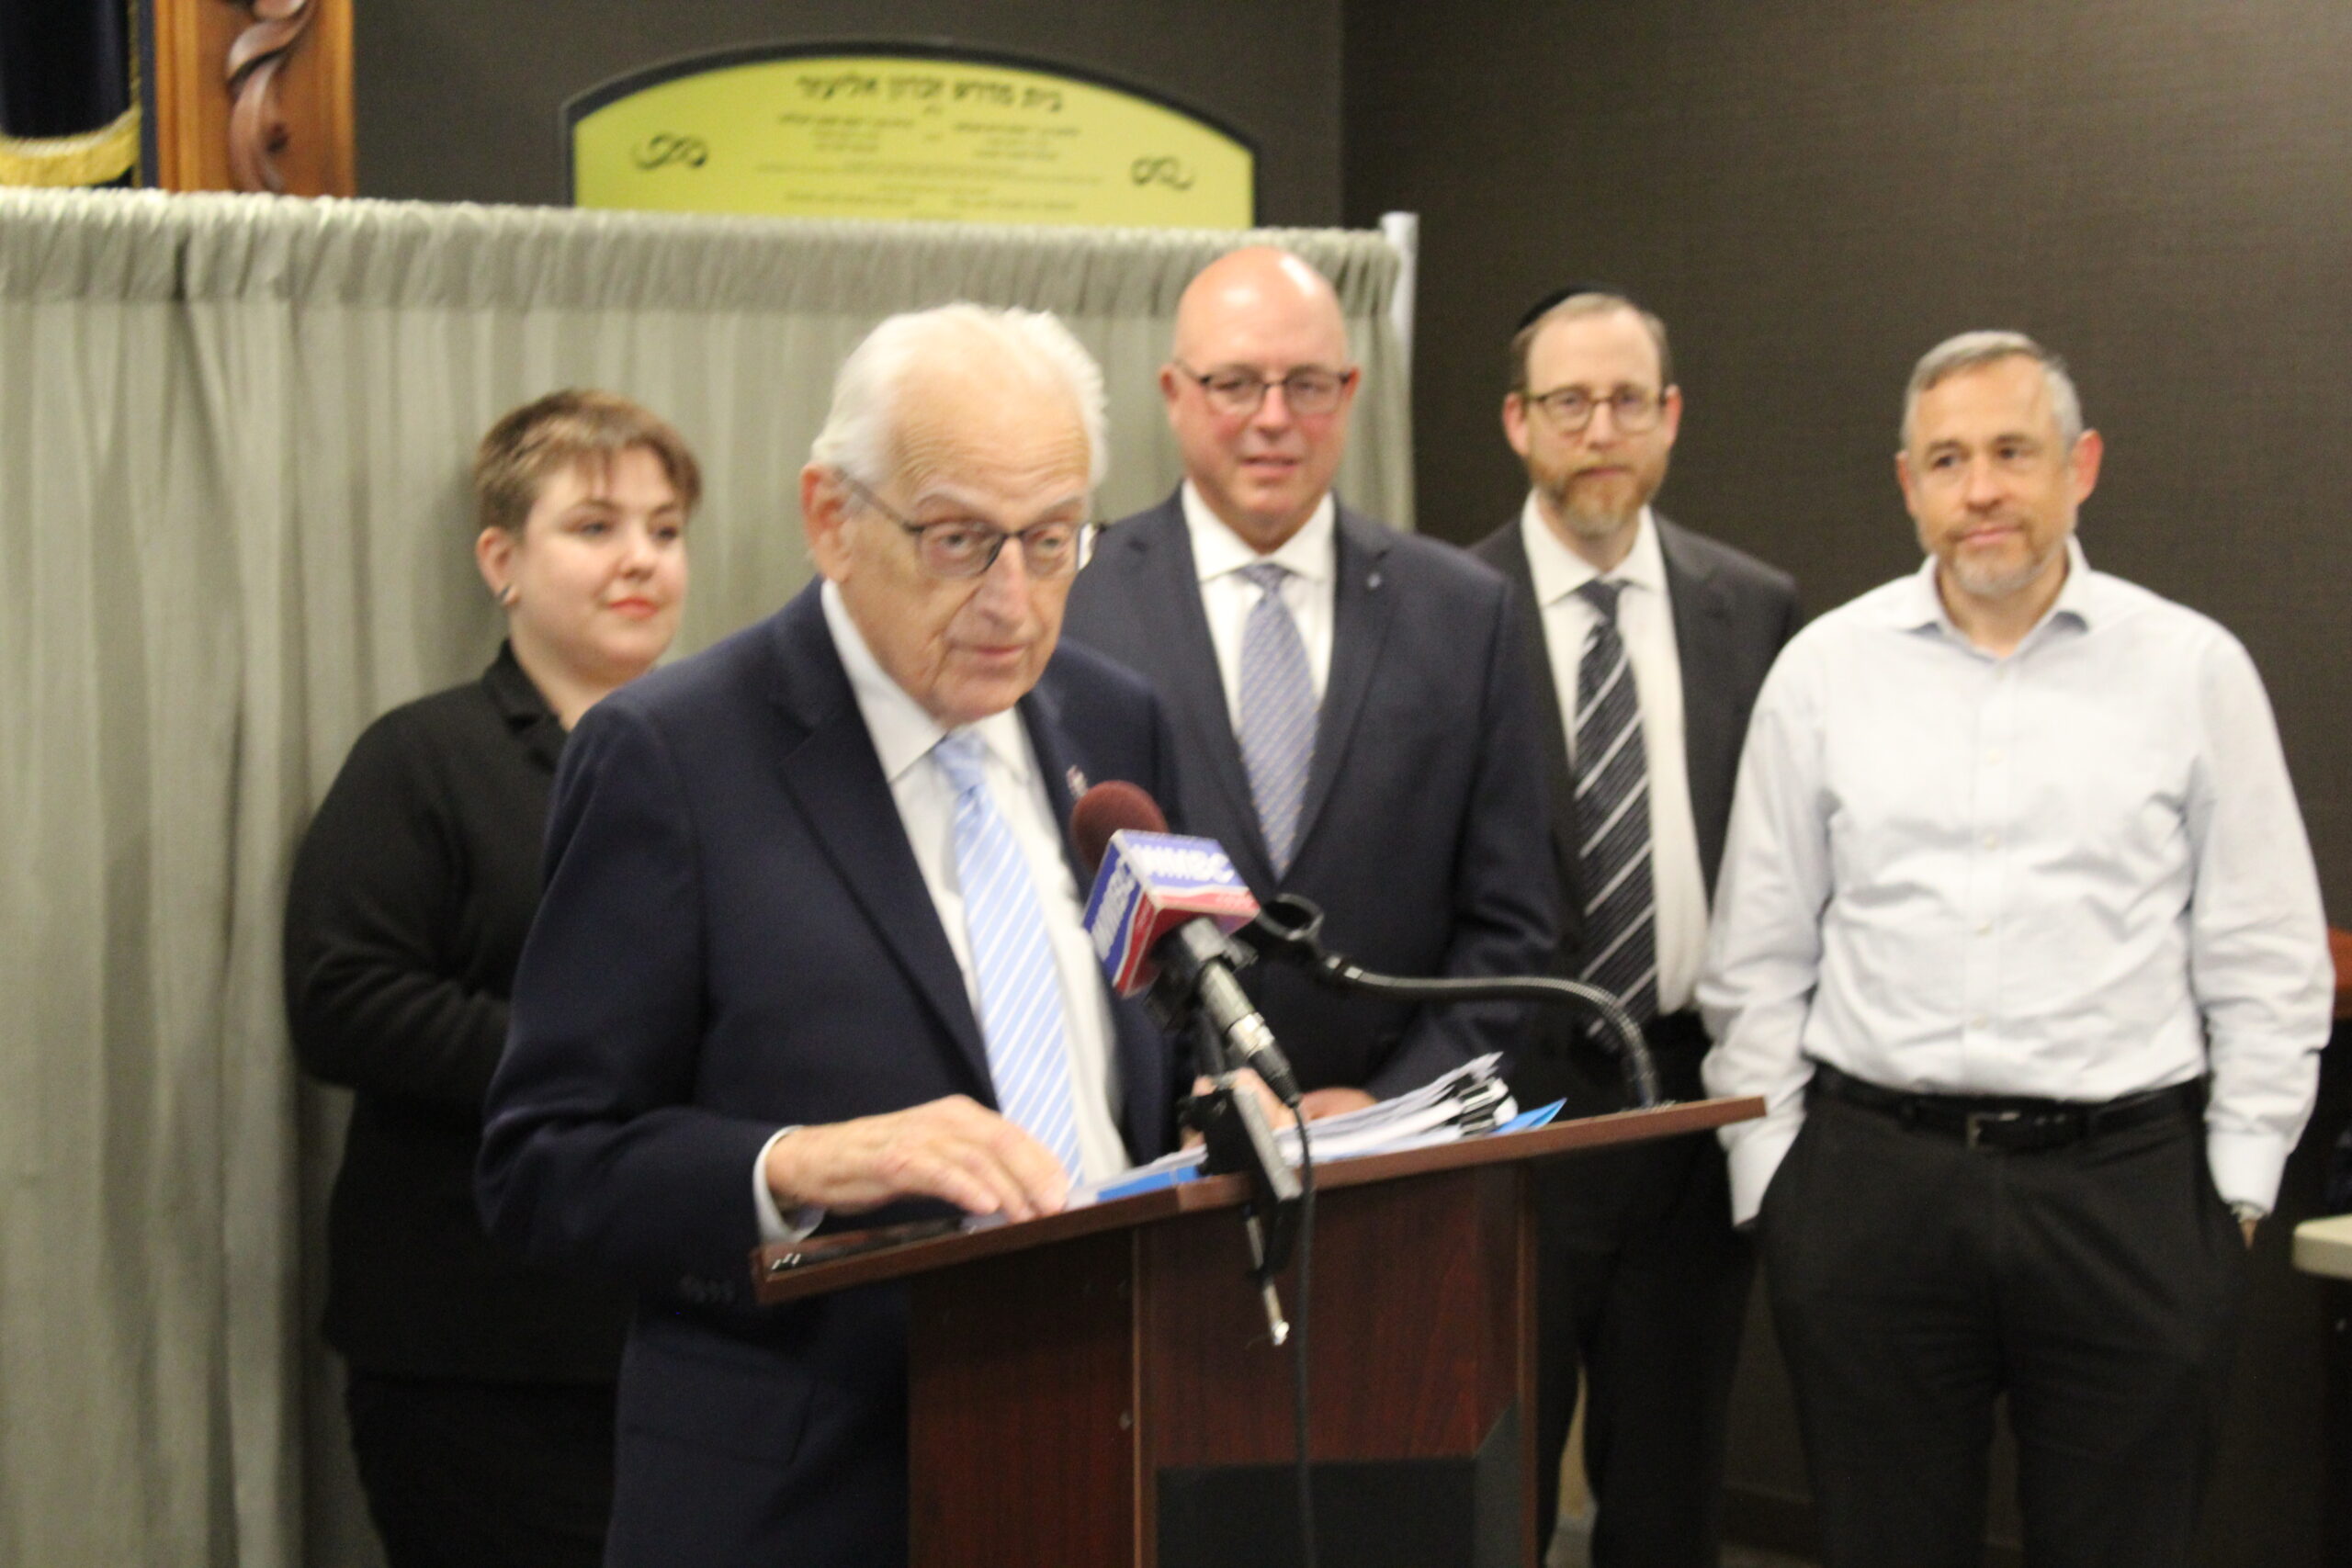 Pascrell Declines Involvement in Pachyderm Pandemonium, According to Insider NJ